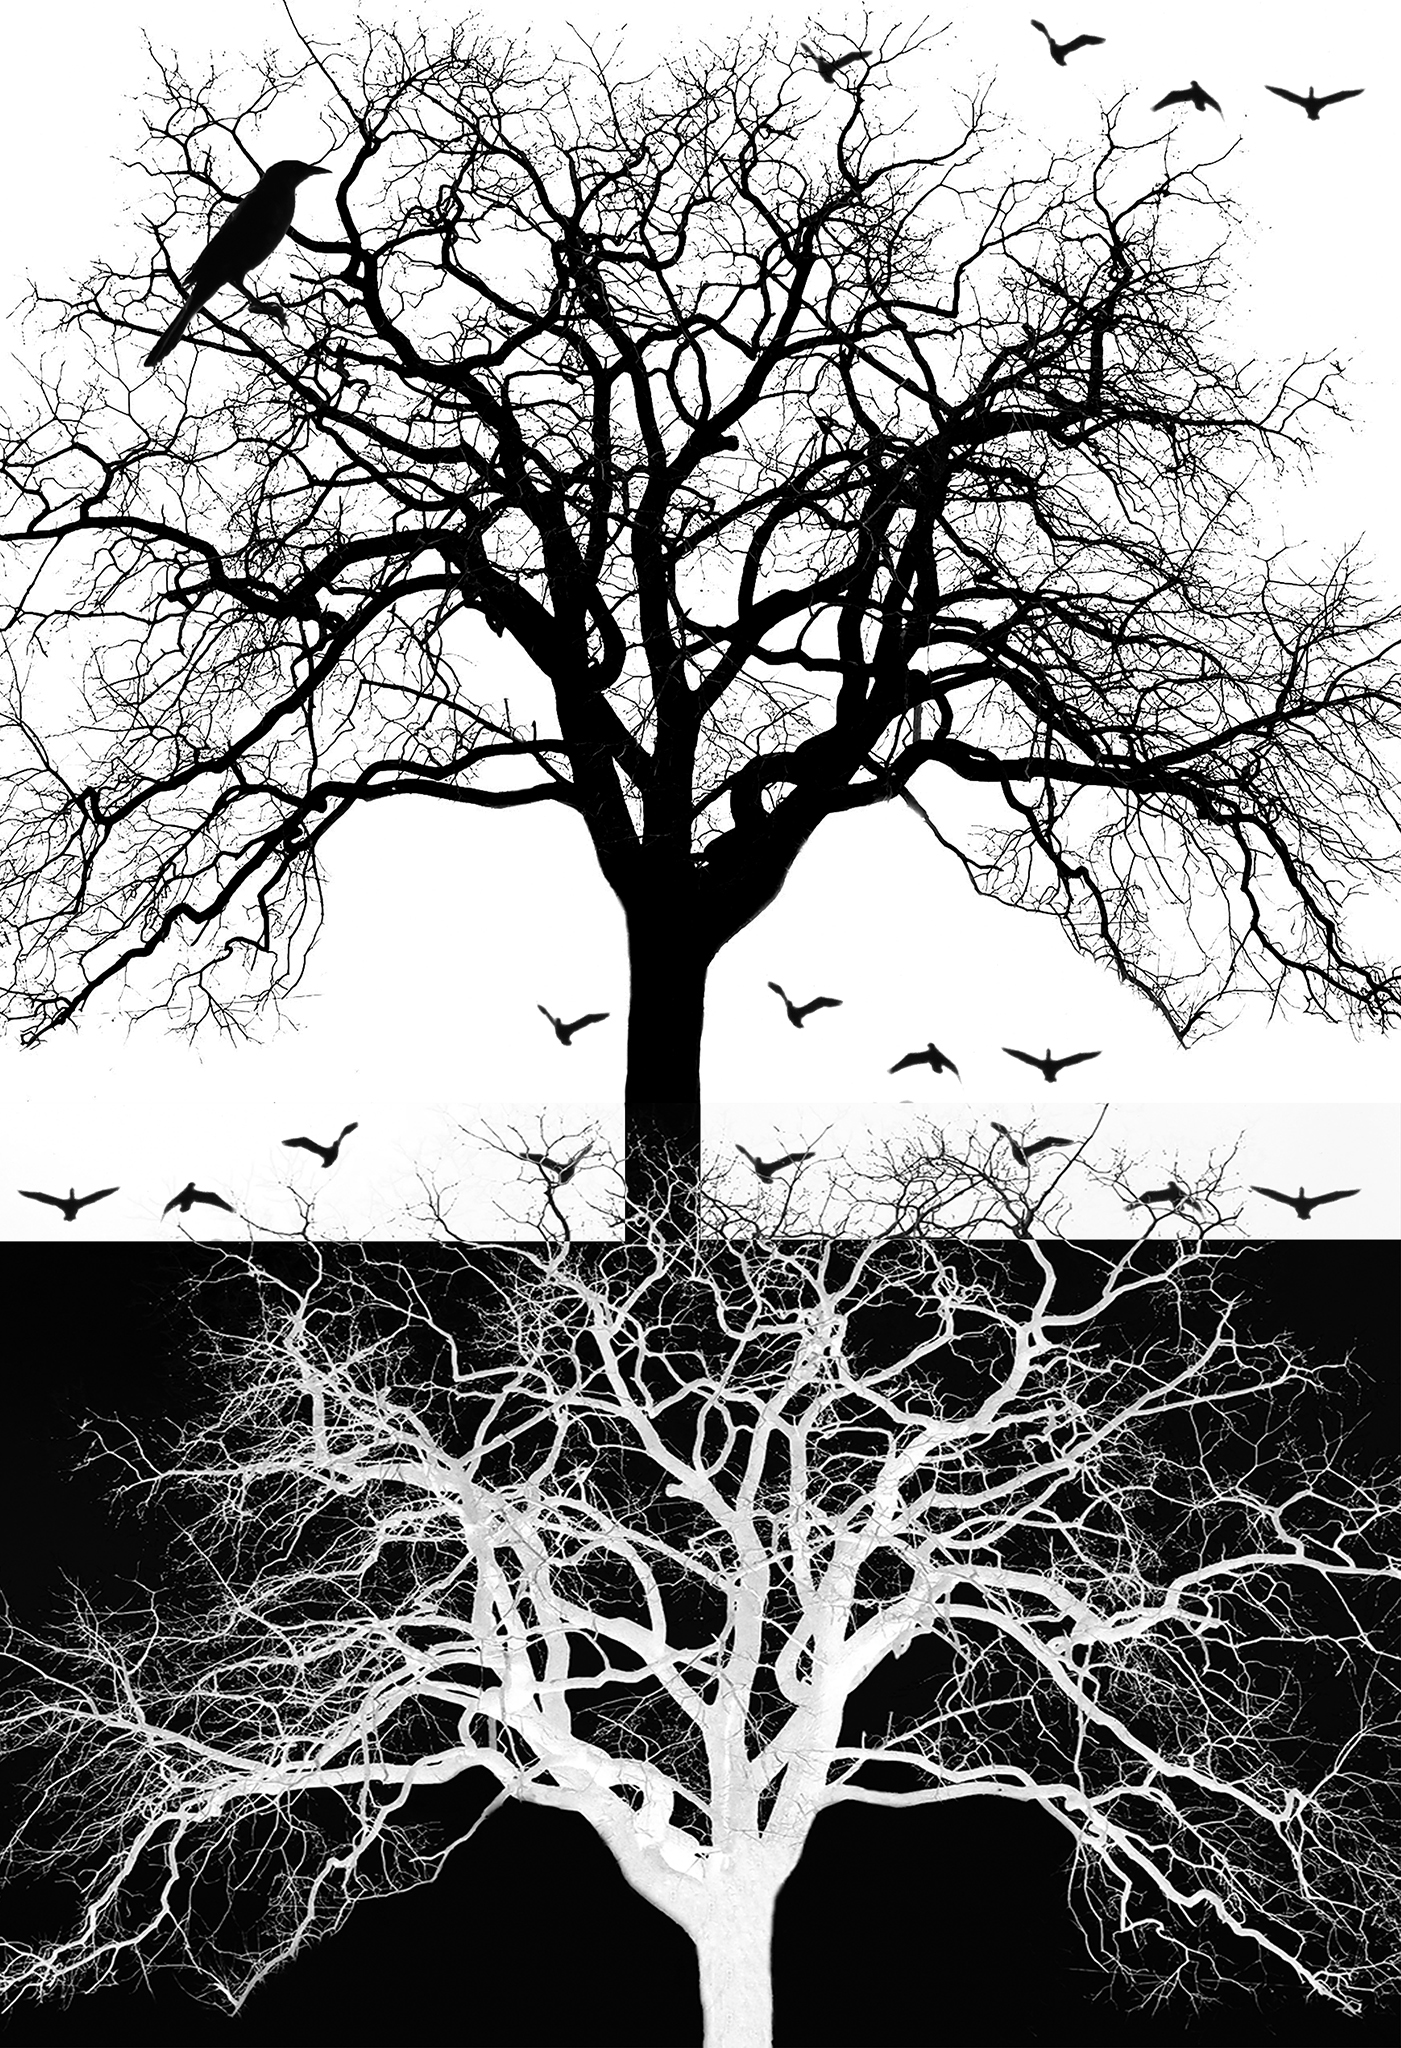 vertical image of crow in a tree with others flying around in the top half 
        			of the picture and the same image inverted in bottom half